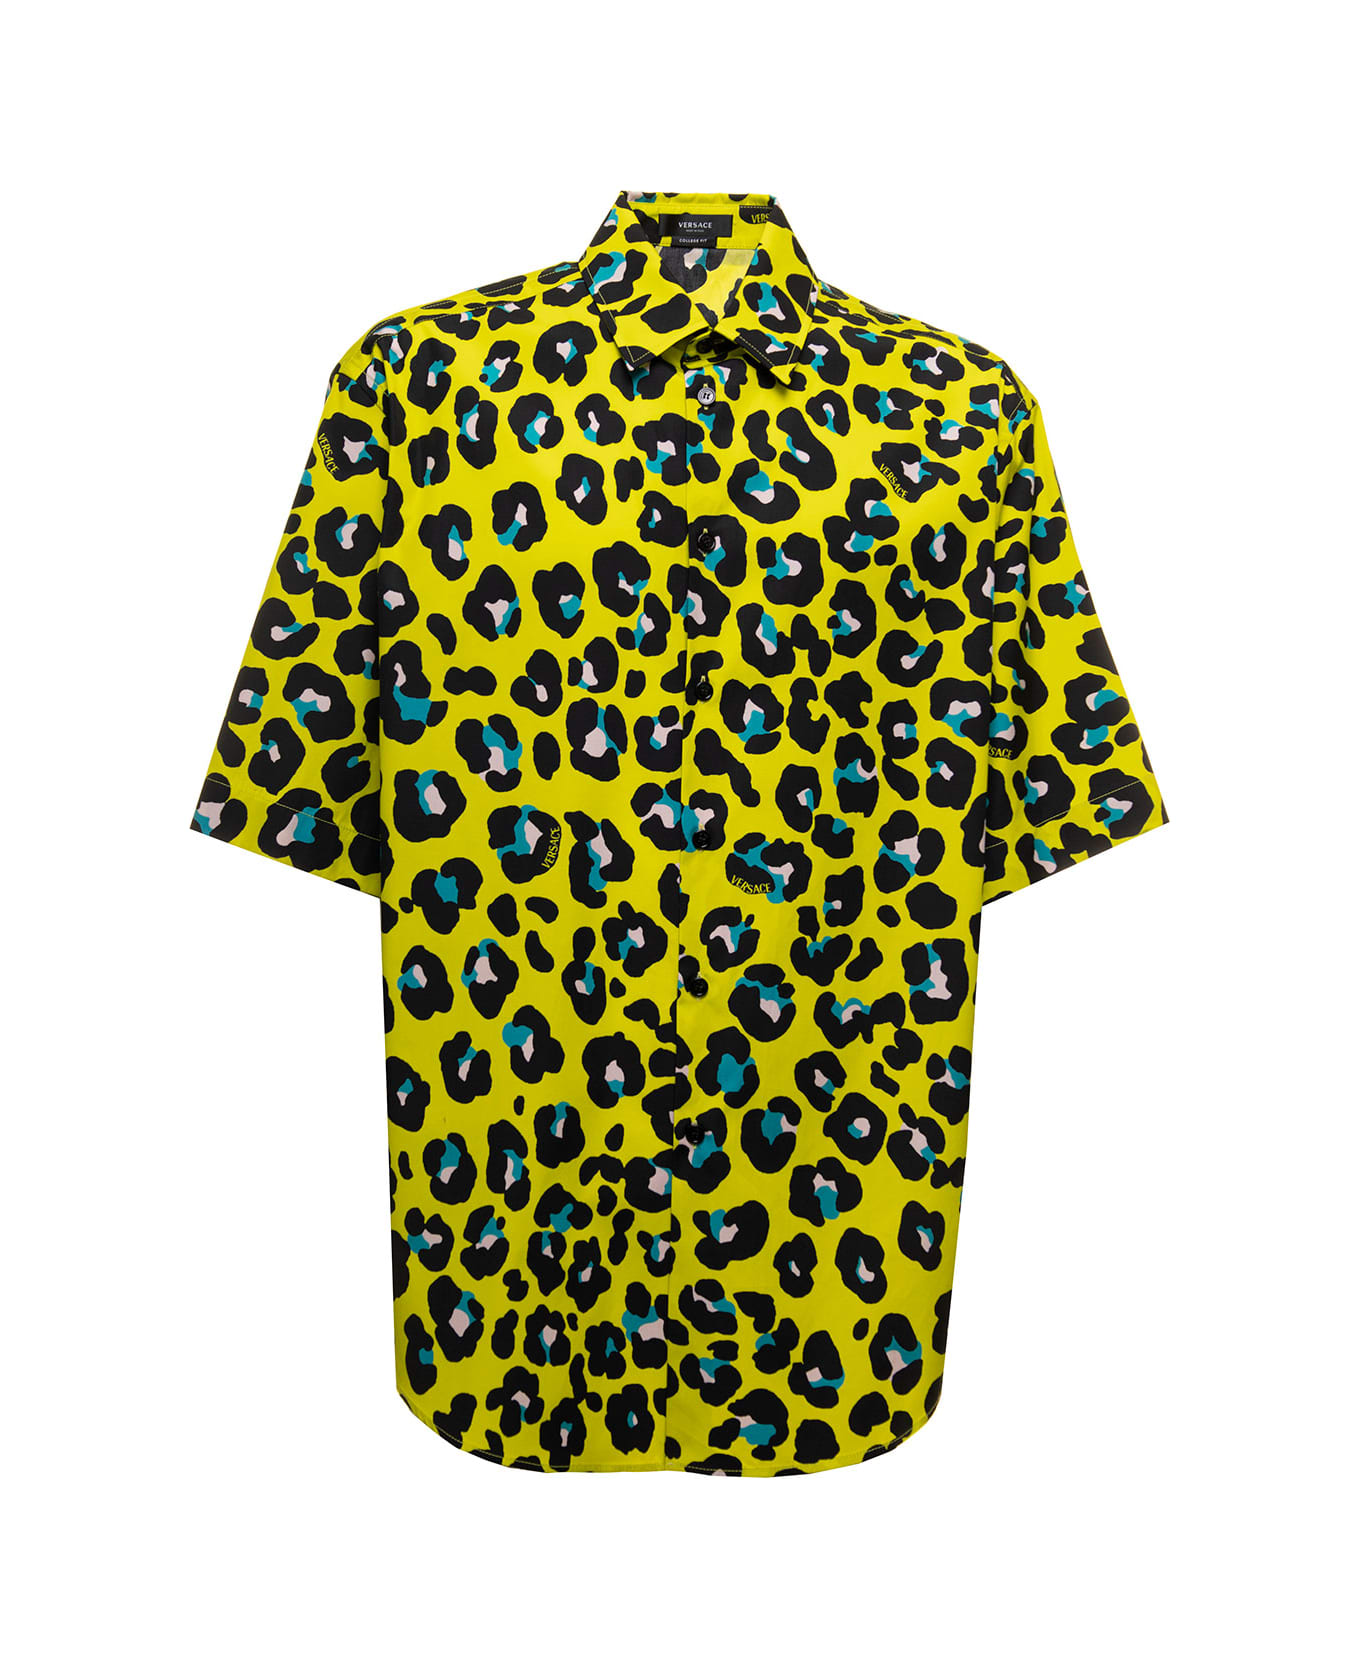 Versace Yellow Shirt In Cotton With Daisy Leopard Allover Pattern Man - Leopardato